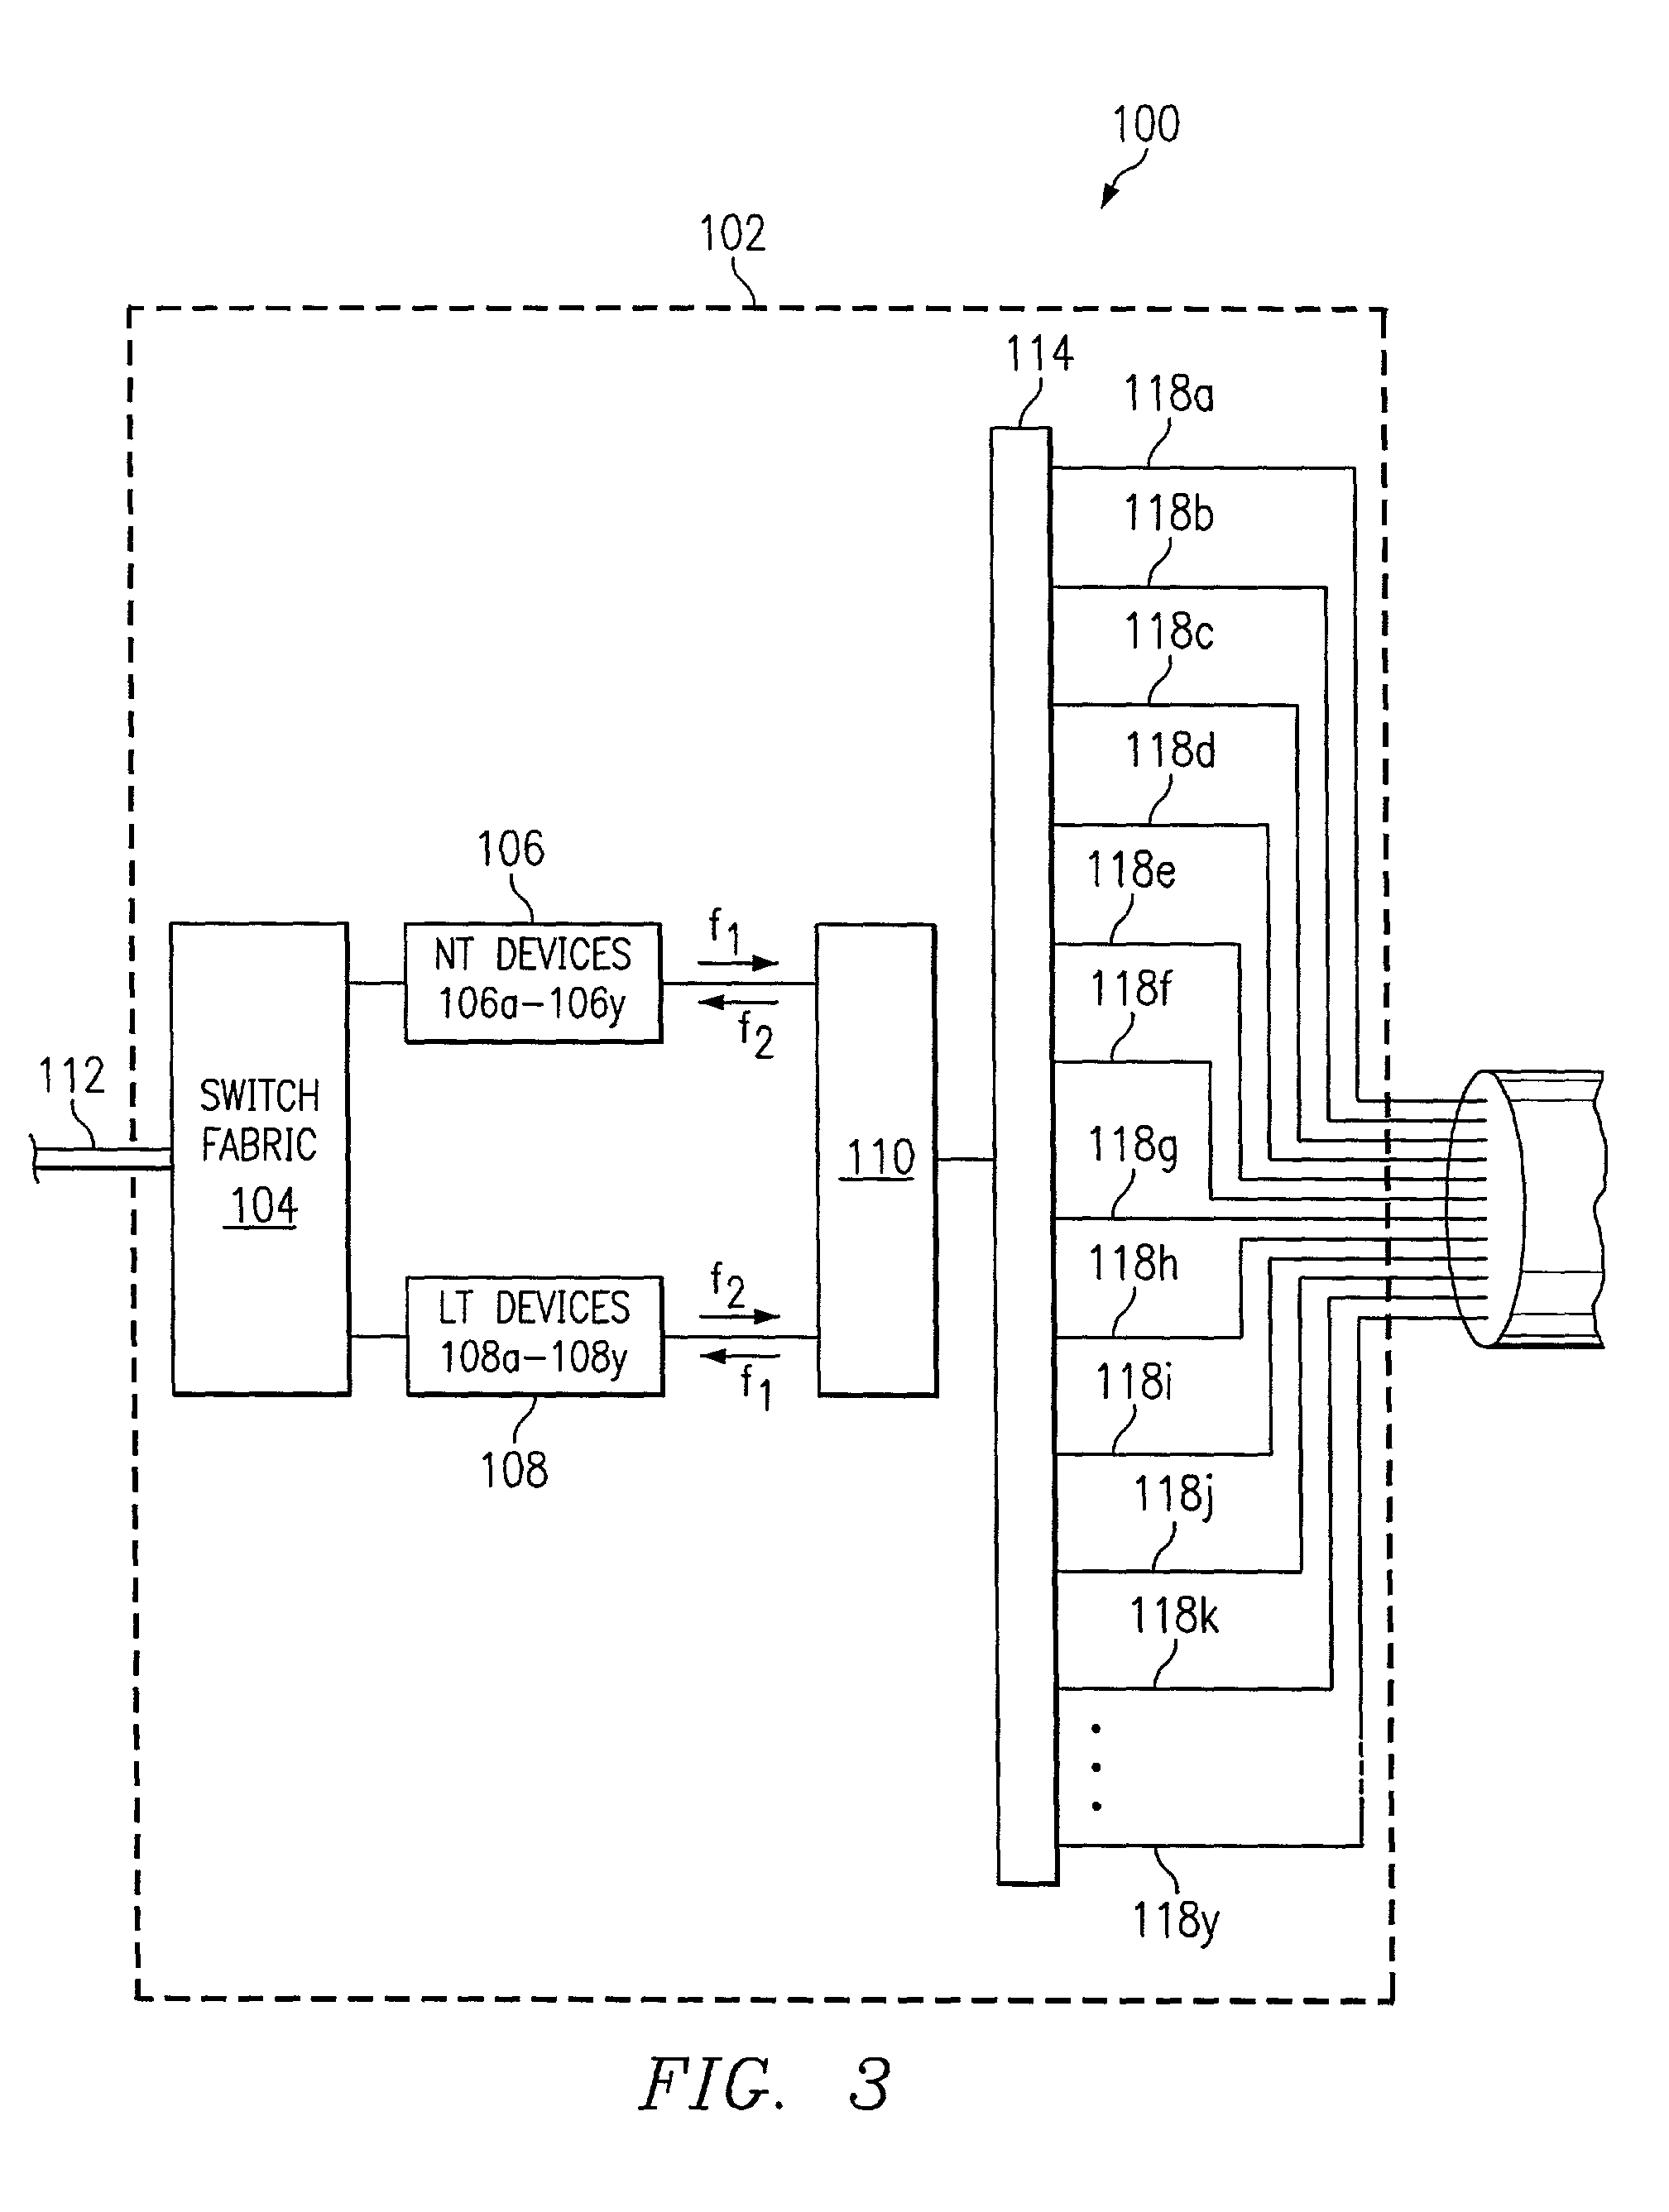 Method and system for measuring crosstalk utilizing a crossbar switch